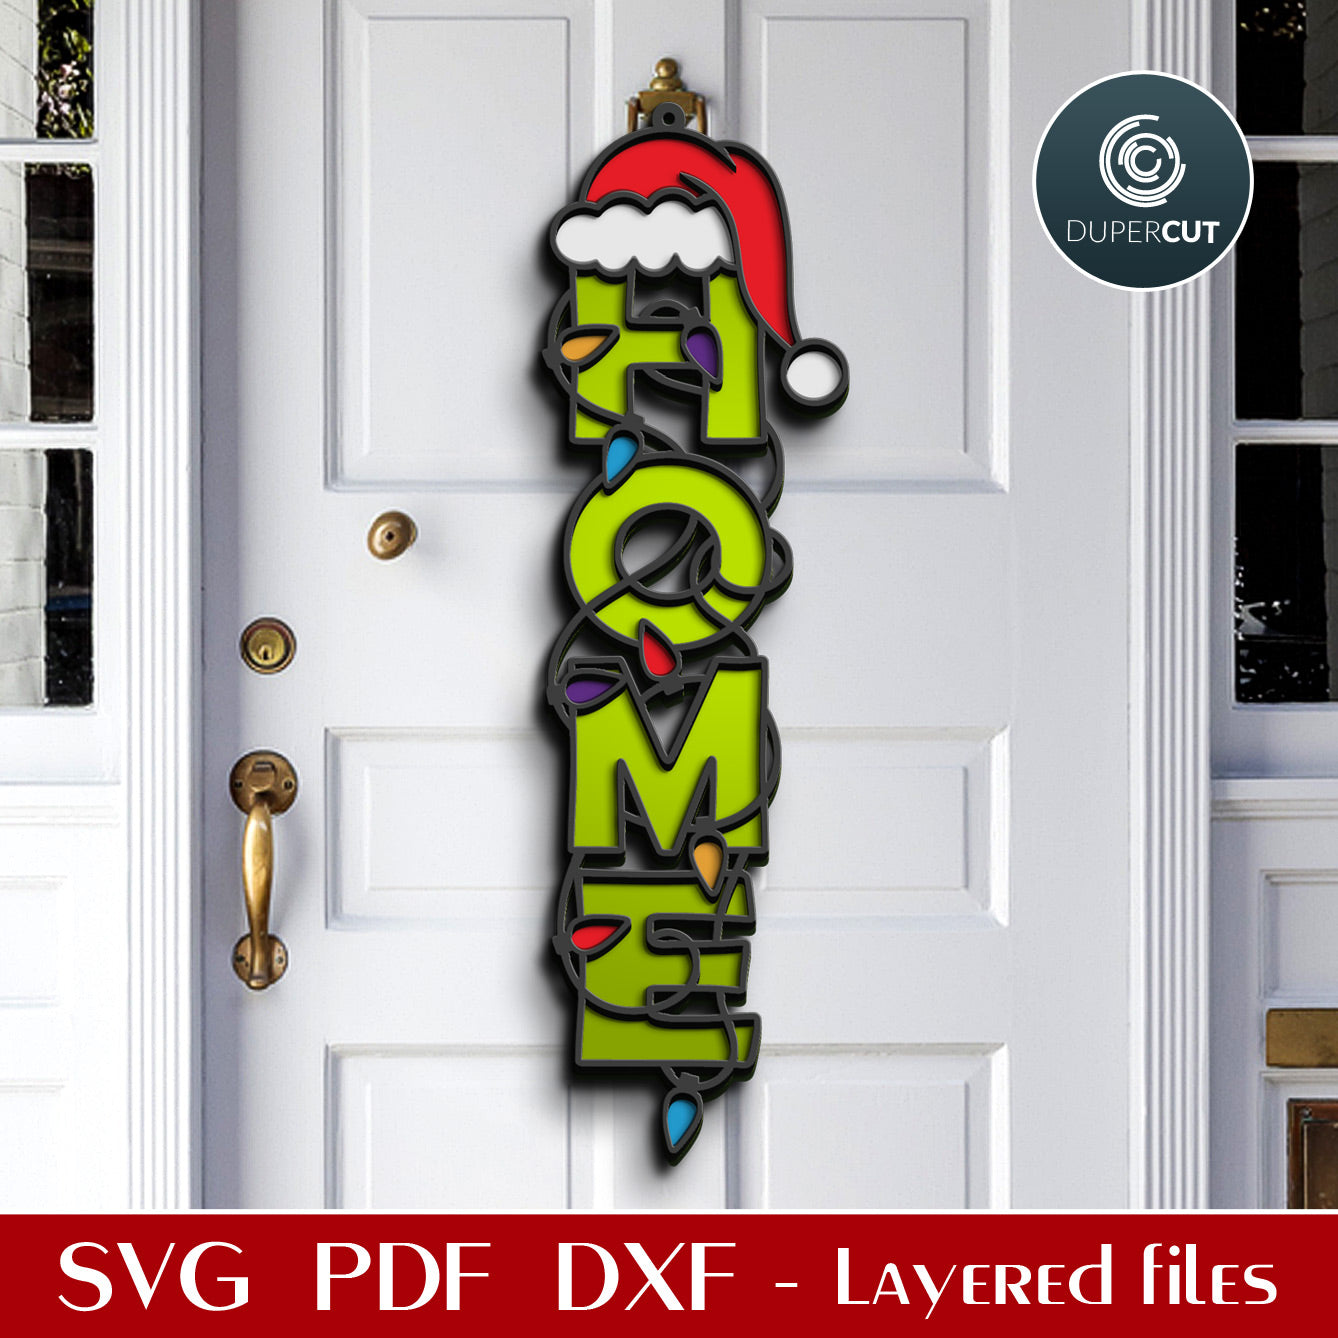 HOME Christmas sign door hanger - SVG DXF layered vector files for laser cutting with Glowforge, Cricut, Silhouette, CNC plasma by DuperCut